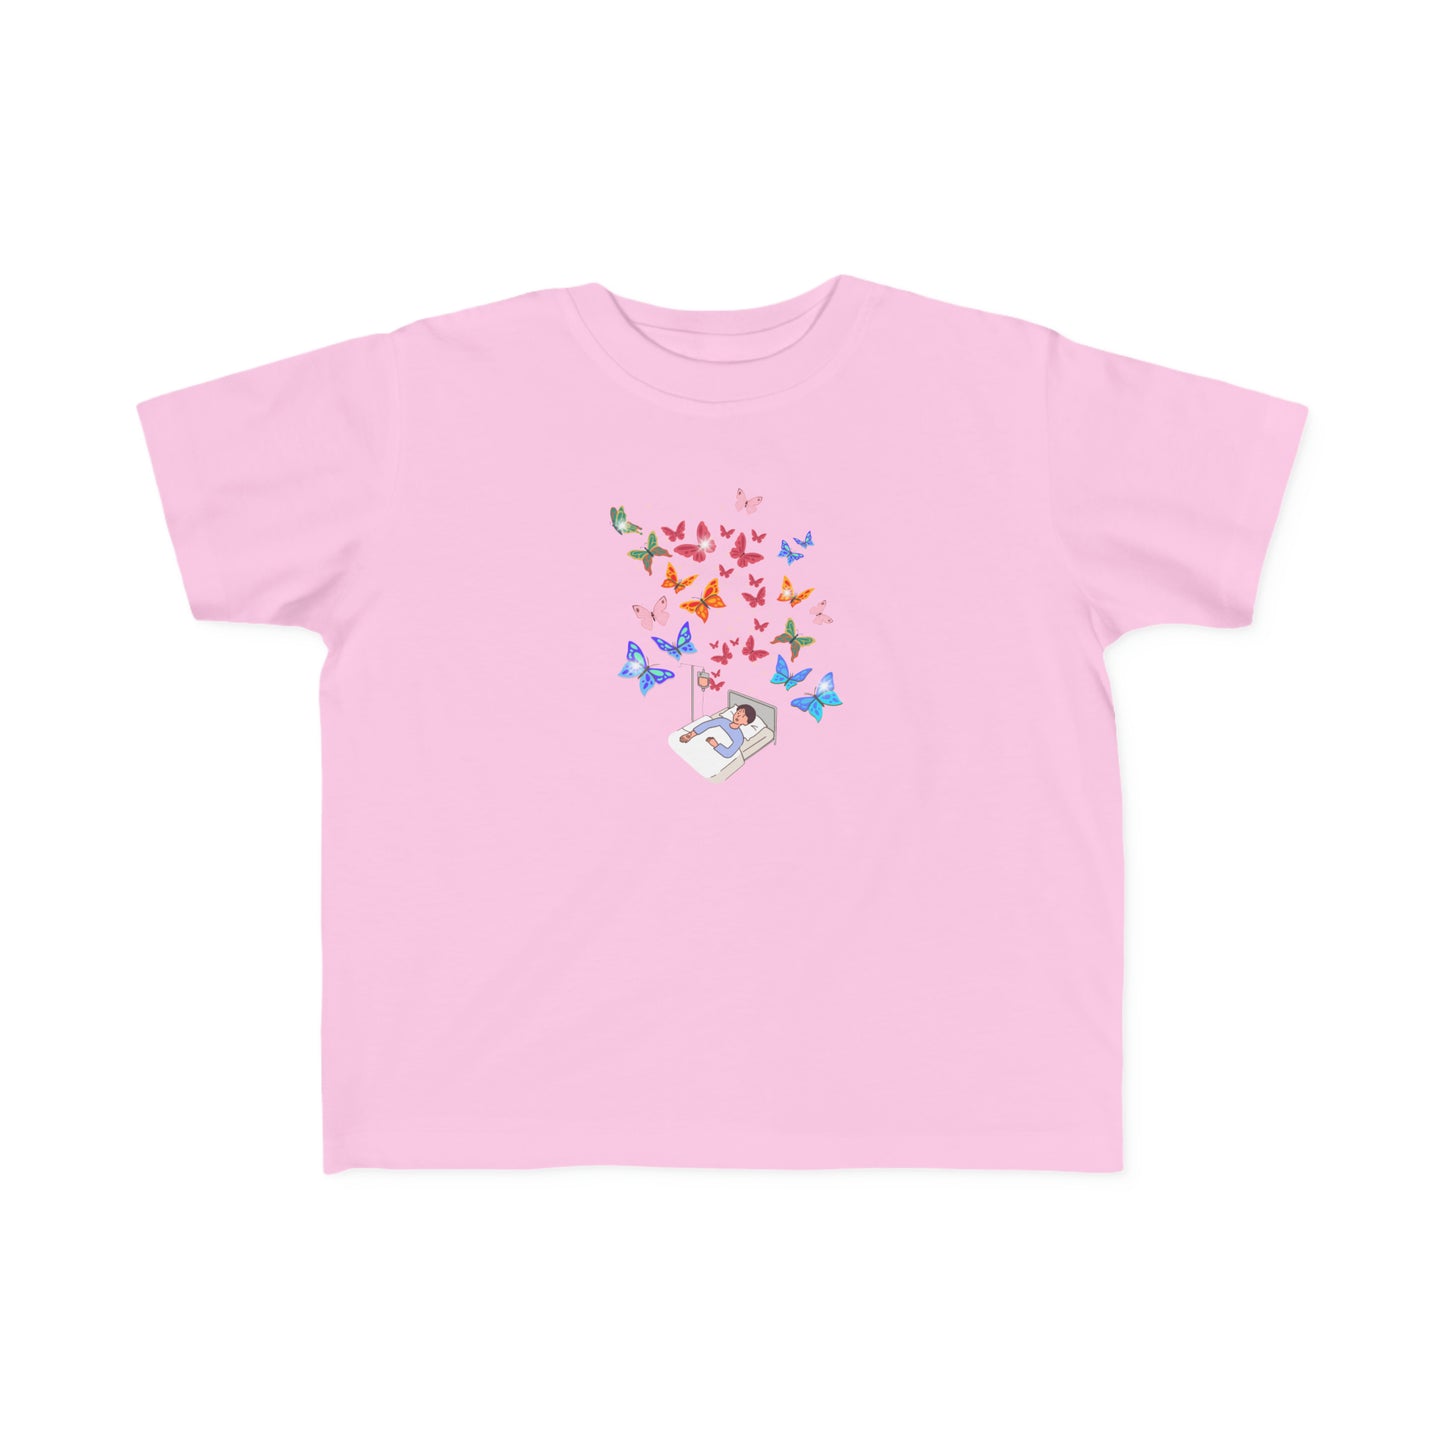 T-shirt for the benefit of the Sainte-Justine foundation - Toddler